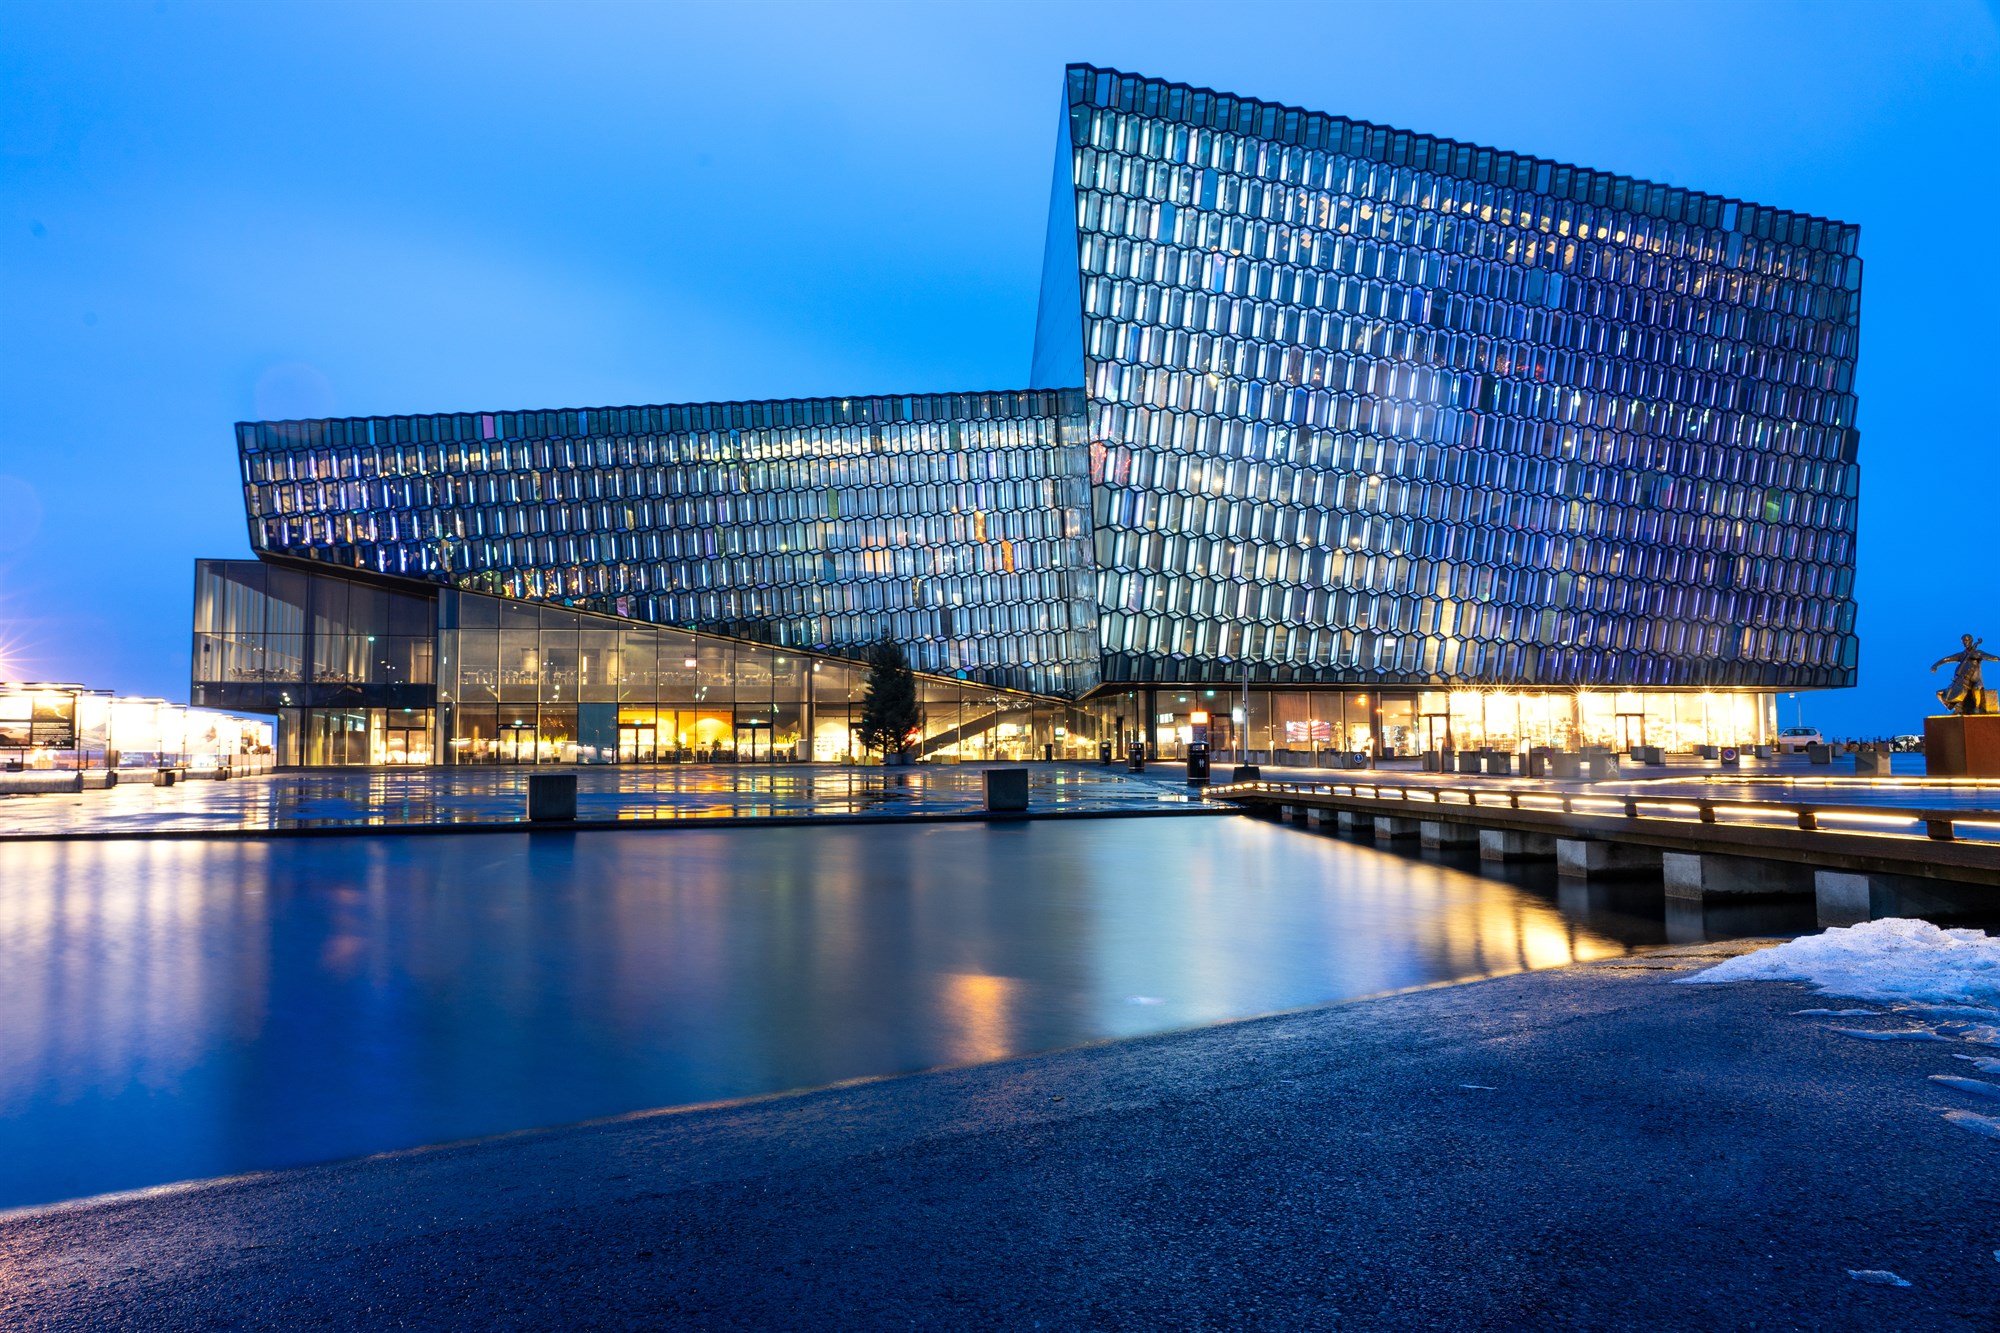 The concert hall glass building in Reykjavik, an iconic landmark.